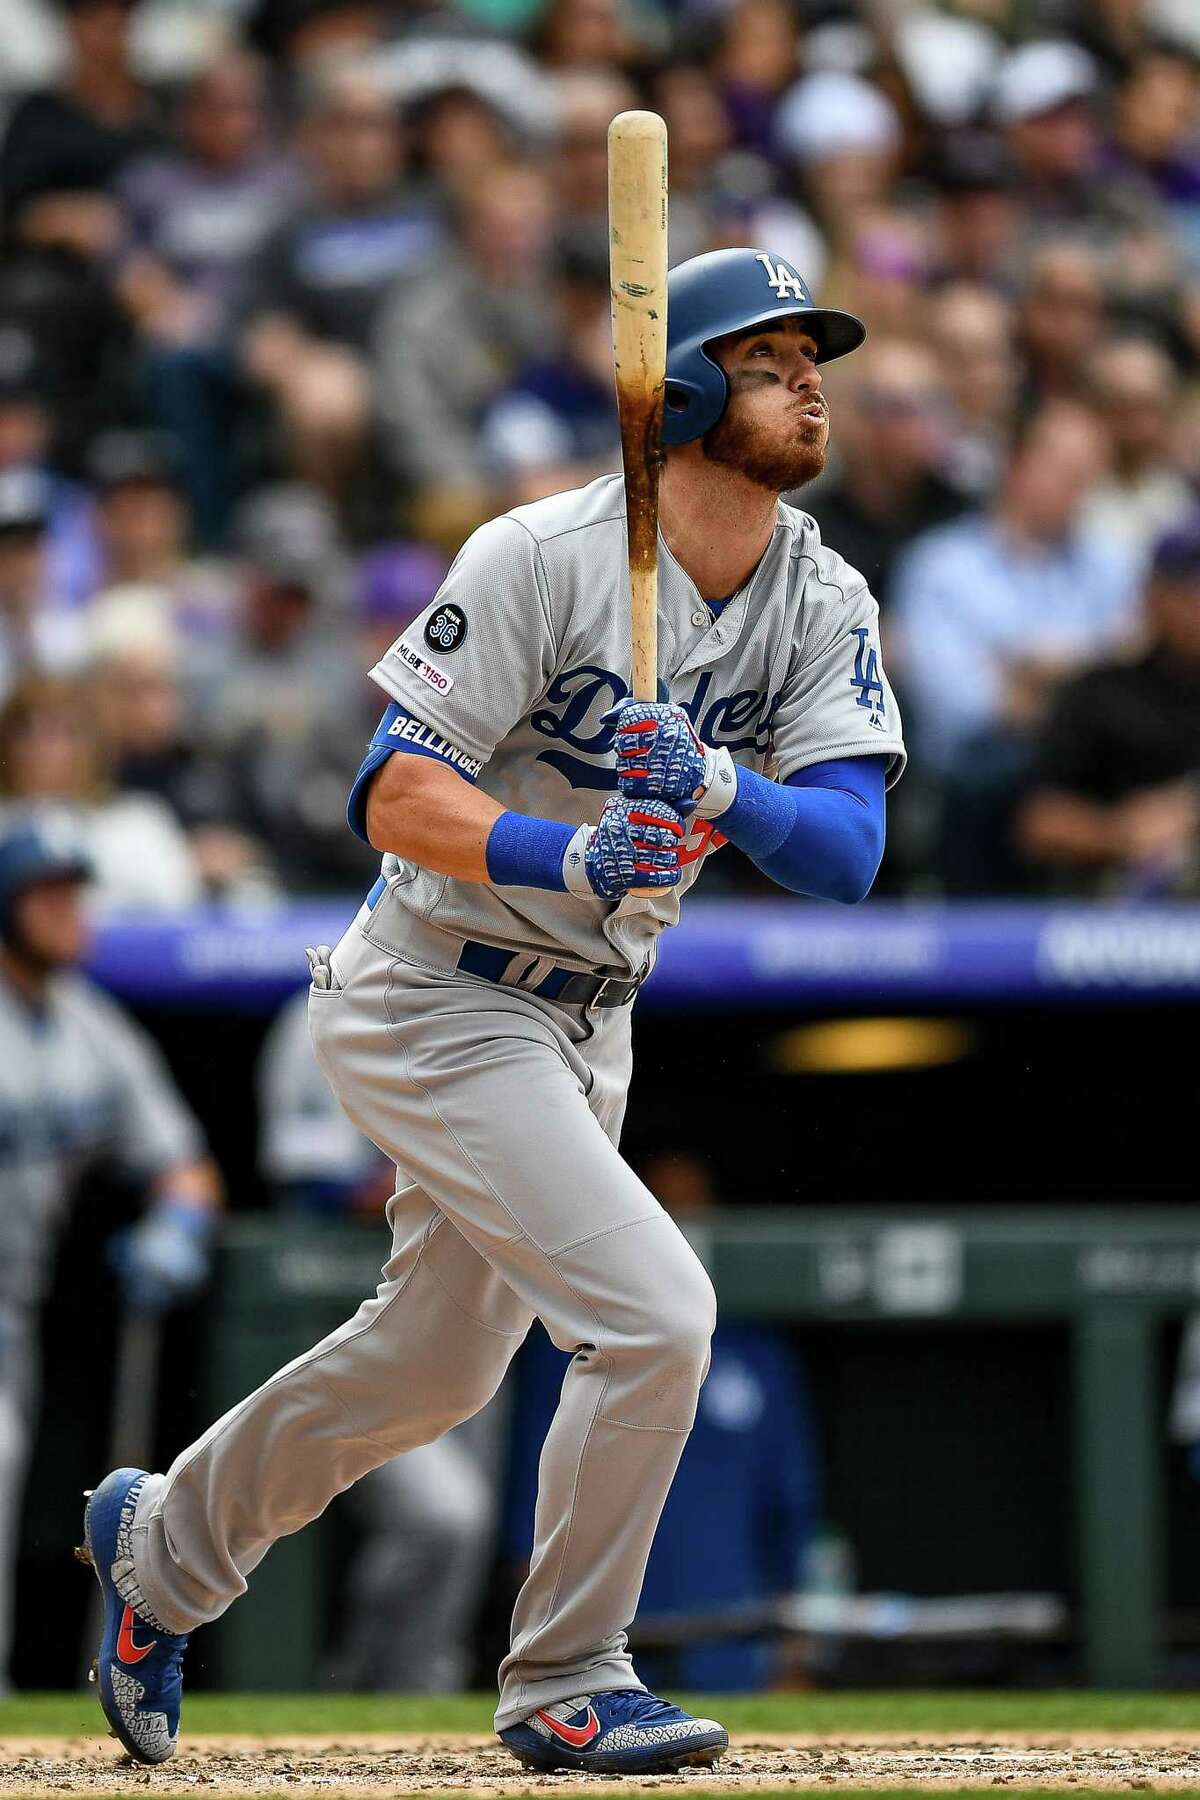 DENVER, CO - APRIL 5: Cody Bellinger #35 of the Los Angeles Dodgers watches the flight of a fifth inning three-run homer against the Colorado Rockies during the Colorado Rockies home opener at Coors Field on April 5, 2019 in Denver, Colorado. (Photo by Dustin Bradford/Getty Images)